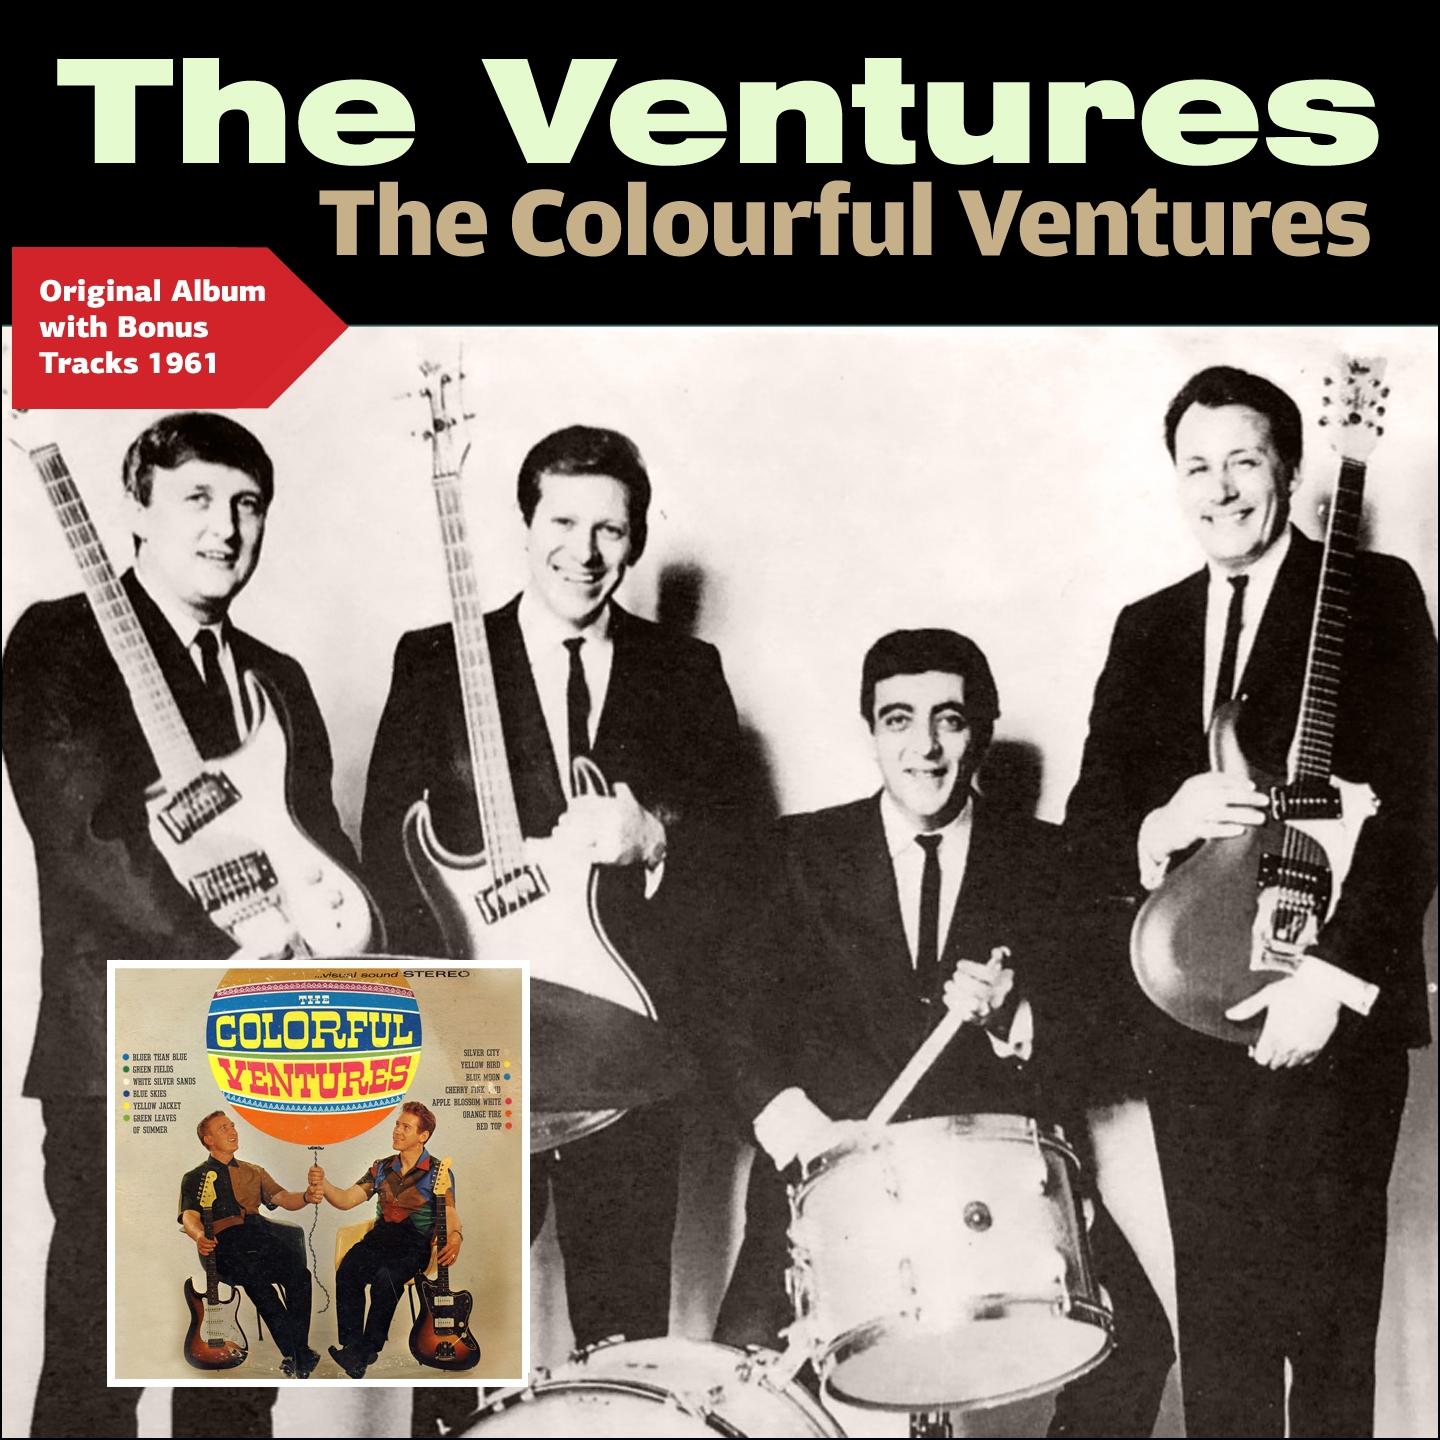 The Colourful Ventures